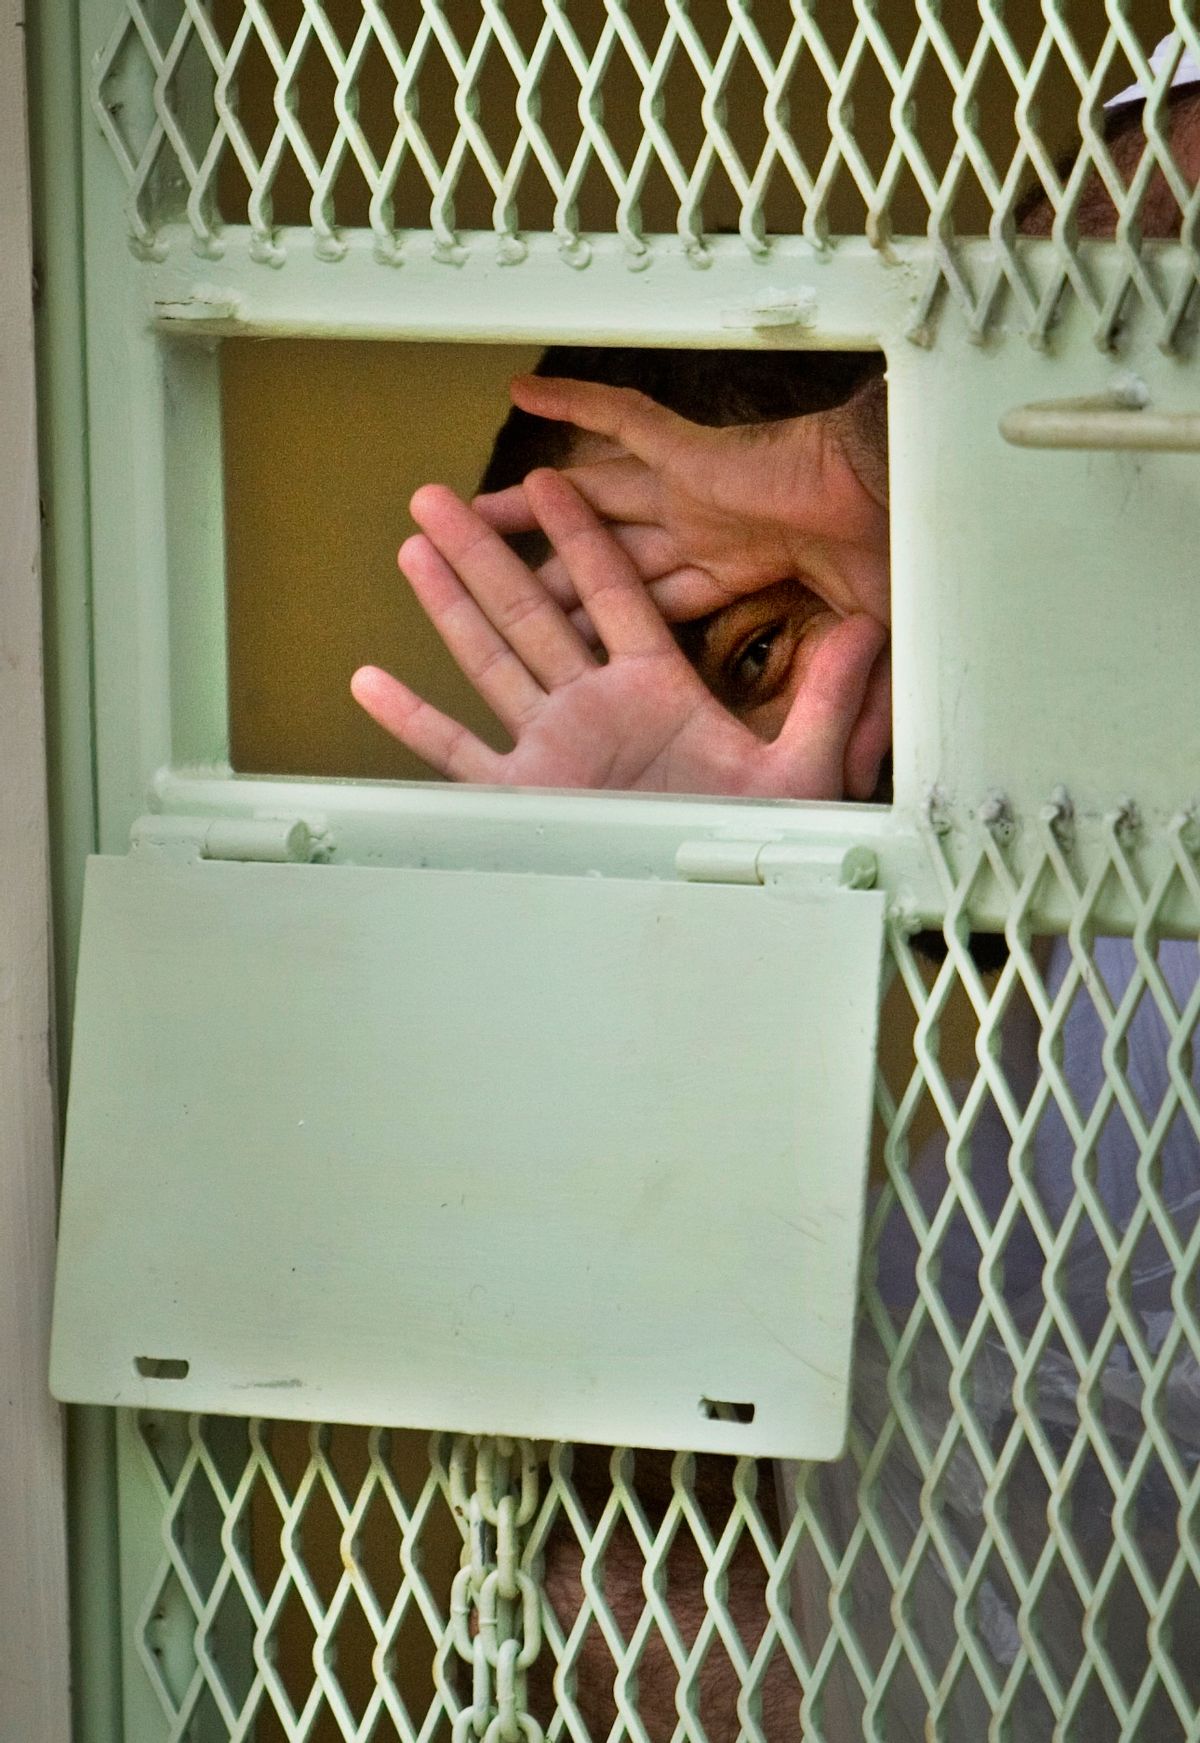 **FILE** In this Nov. 18, 2008 file photo, reviewed by the U.S. Military, a Guantanamo detainee peers through his hands from inside his cell at the Camp Echo detention facility at the U.S. Naval Base, in Guantanamo Bay, Cuba. A U.S. appeals court has overturned a ruling, Wednesday, Feb. 18, 2009, that would have transferred 17 Guantanamo Bay detainees to the United States. The men have been cleared for release from Guantanamo, but the United States will not send them home to China for fear they will be tortured. So they remain in prison while the U.S. figures out what to do with them. (AP Photo/Brennan Linsley, File) (Associated Press)